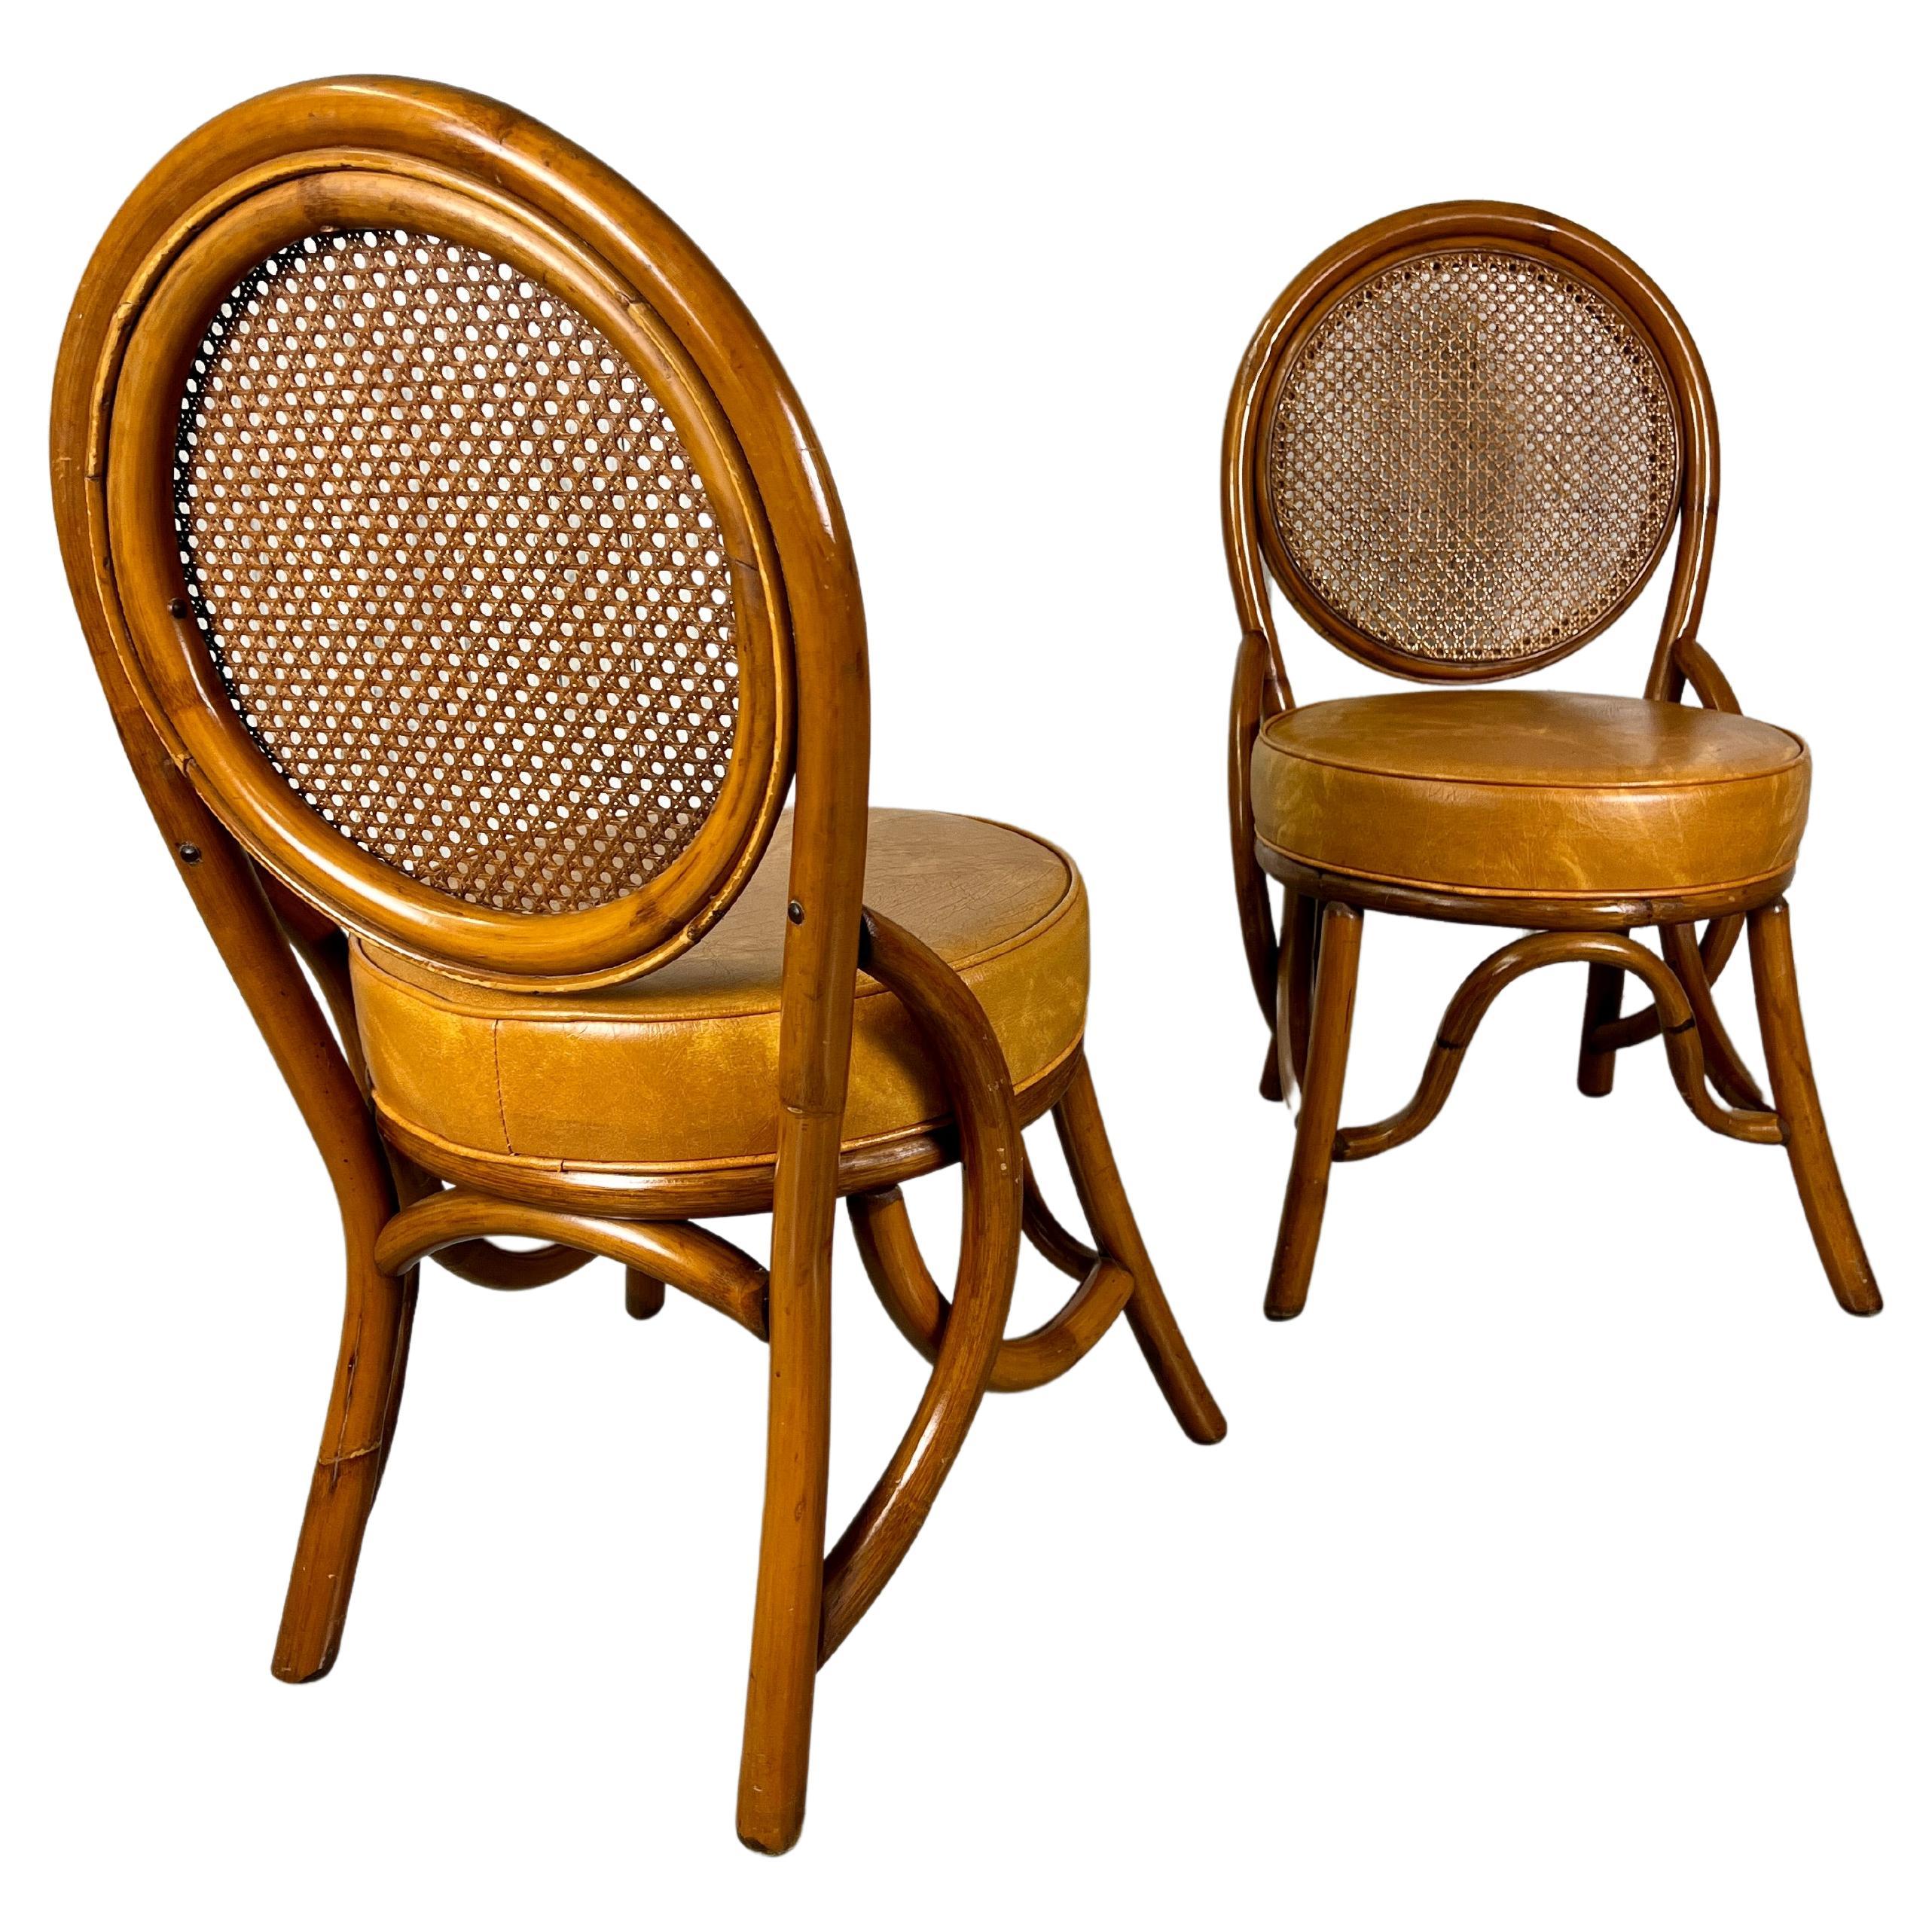 Stackable Chair with Padding Bistro Conservatory Chair Made of Natural Rattan Brown korb.outlet Wicker Rattan Armchair 